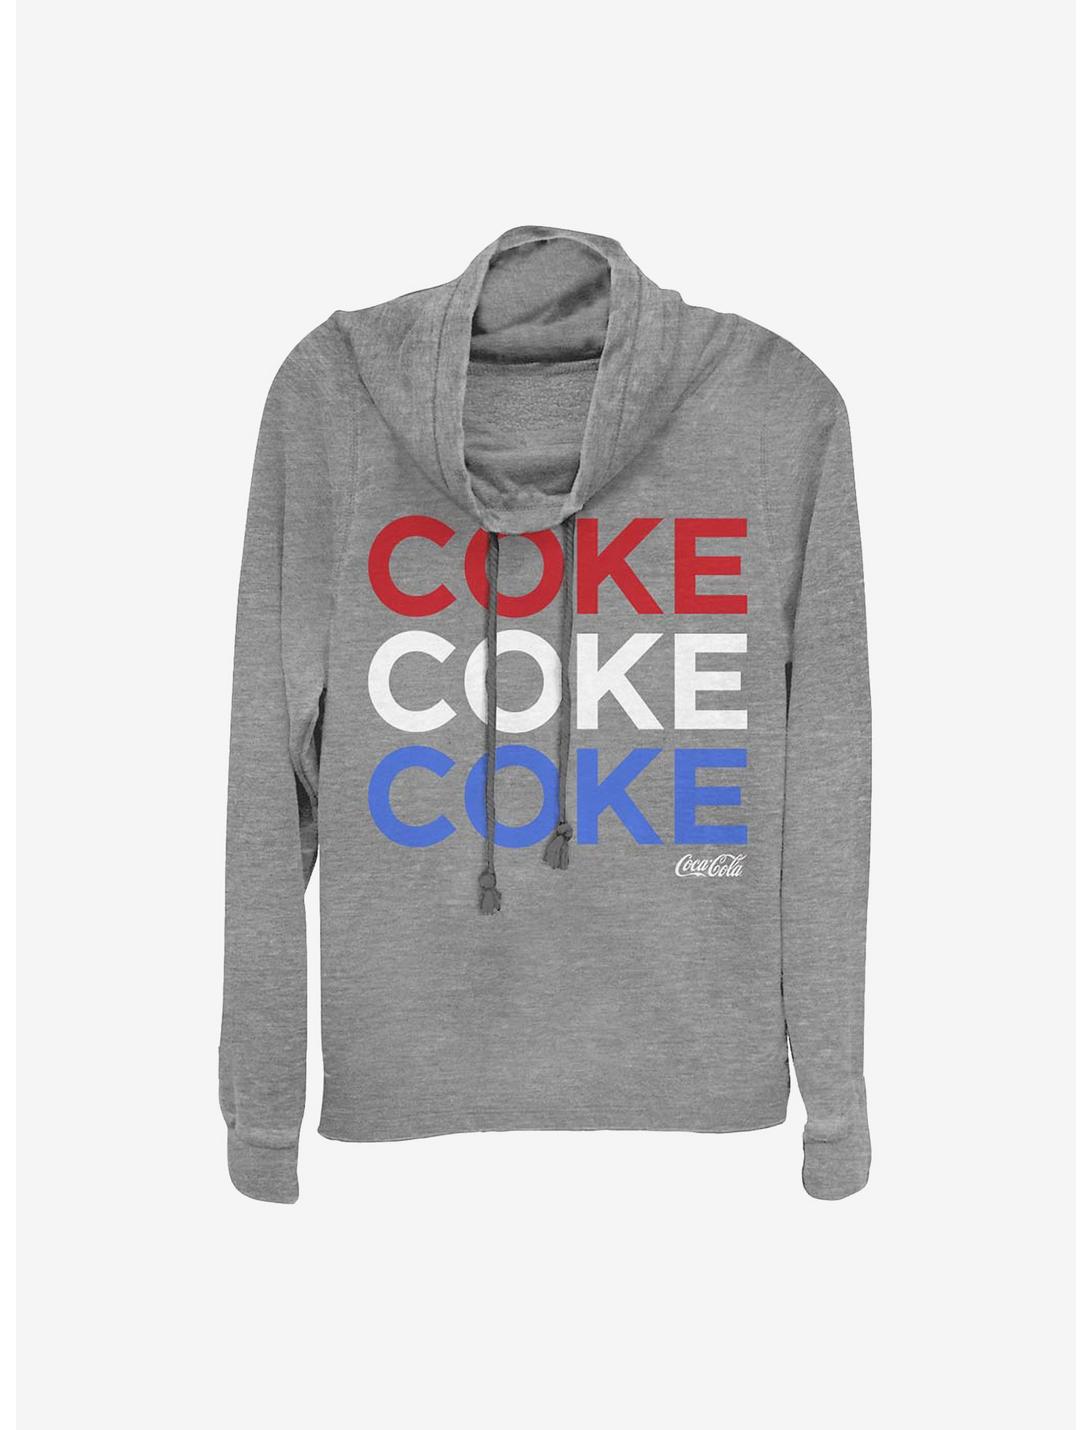 Coca-Cola Red White And Coke Cowlneck Long-Sleeve Girls Top, GRAY HTR, hi-res